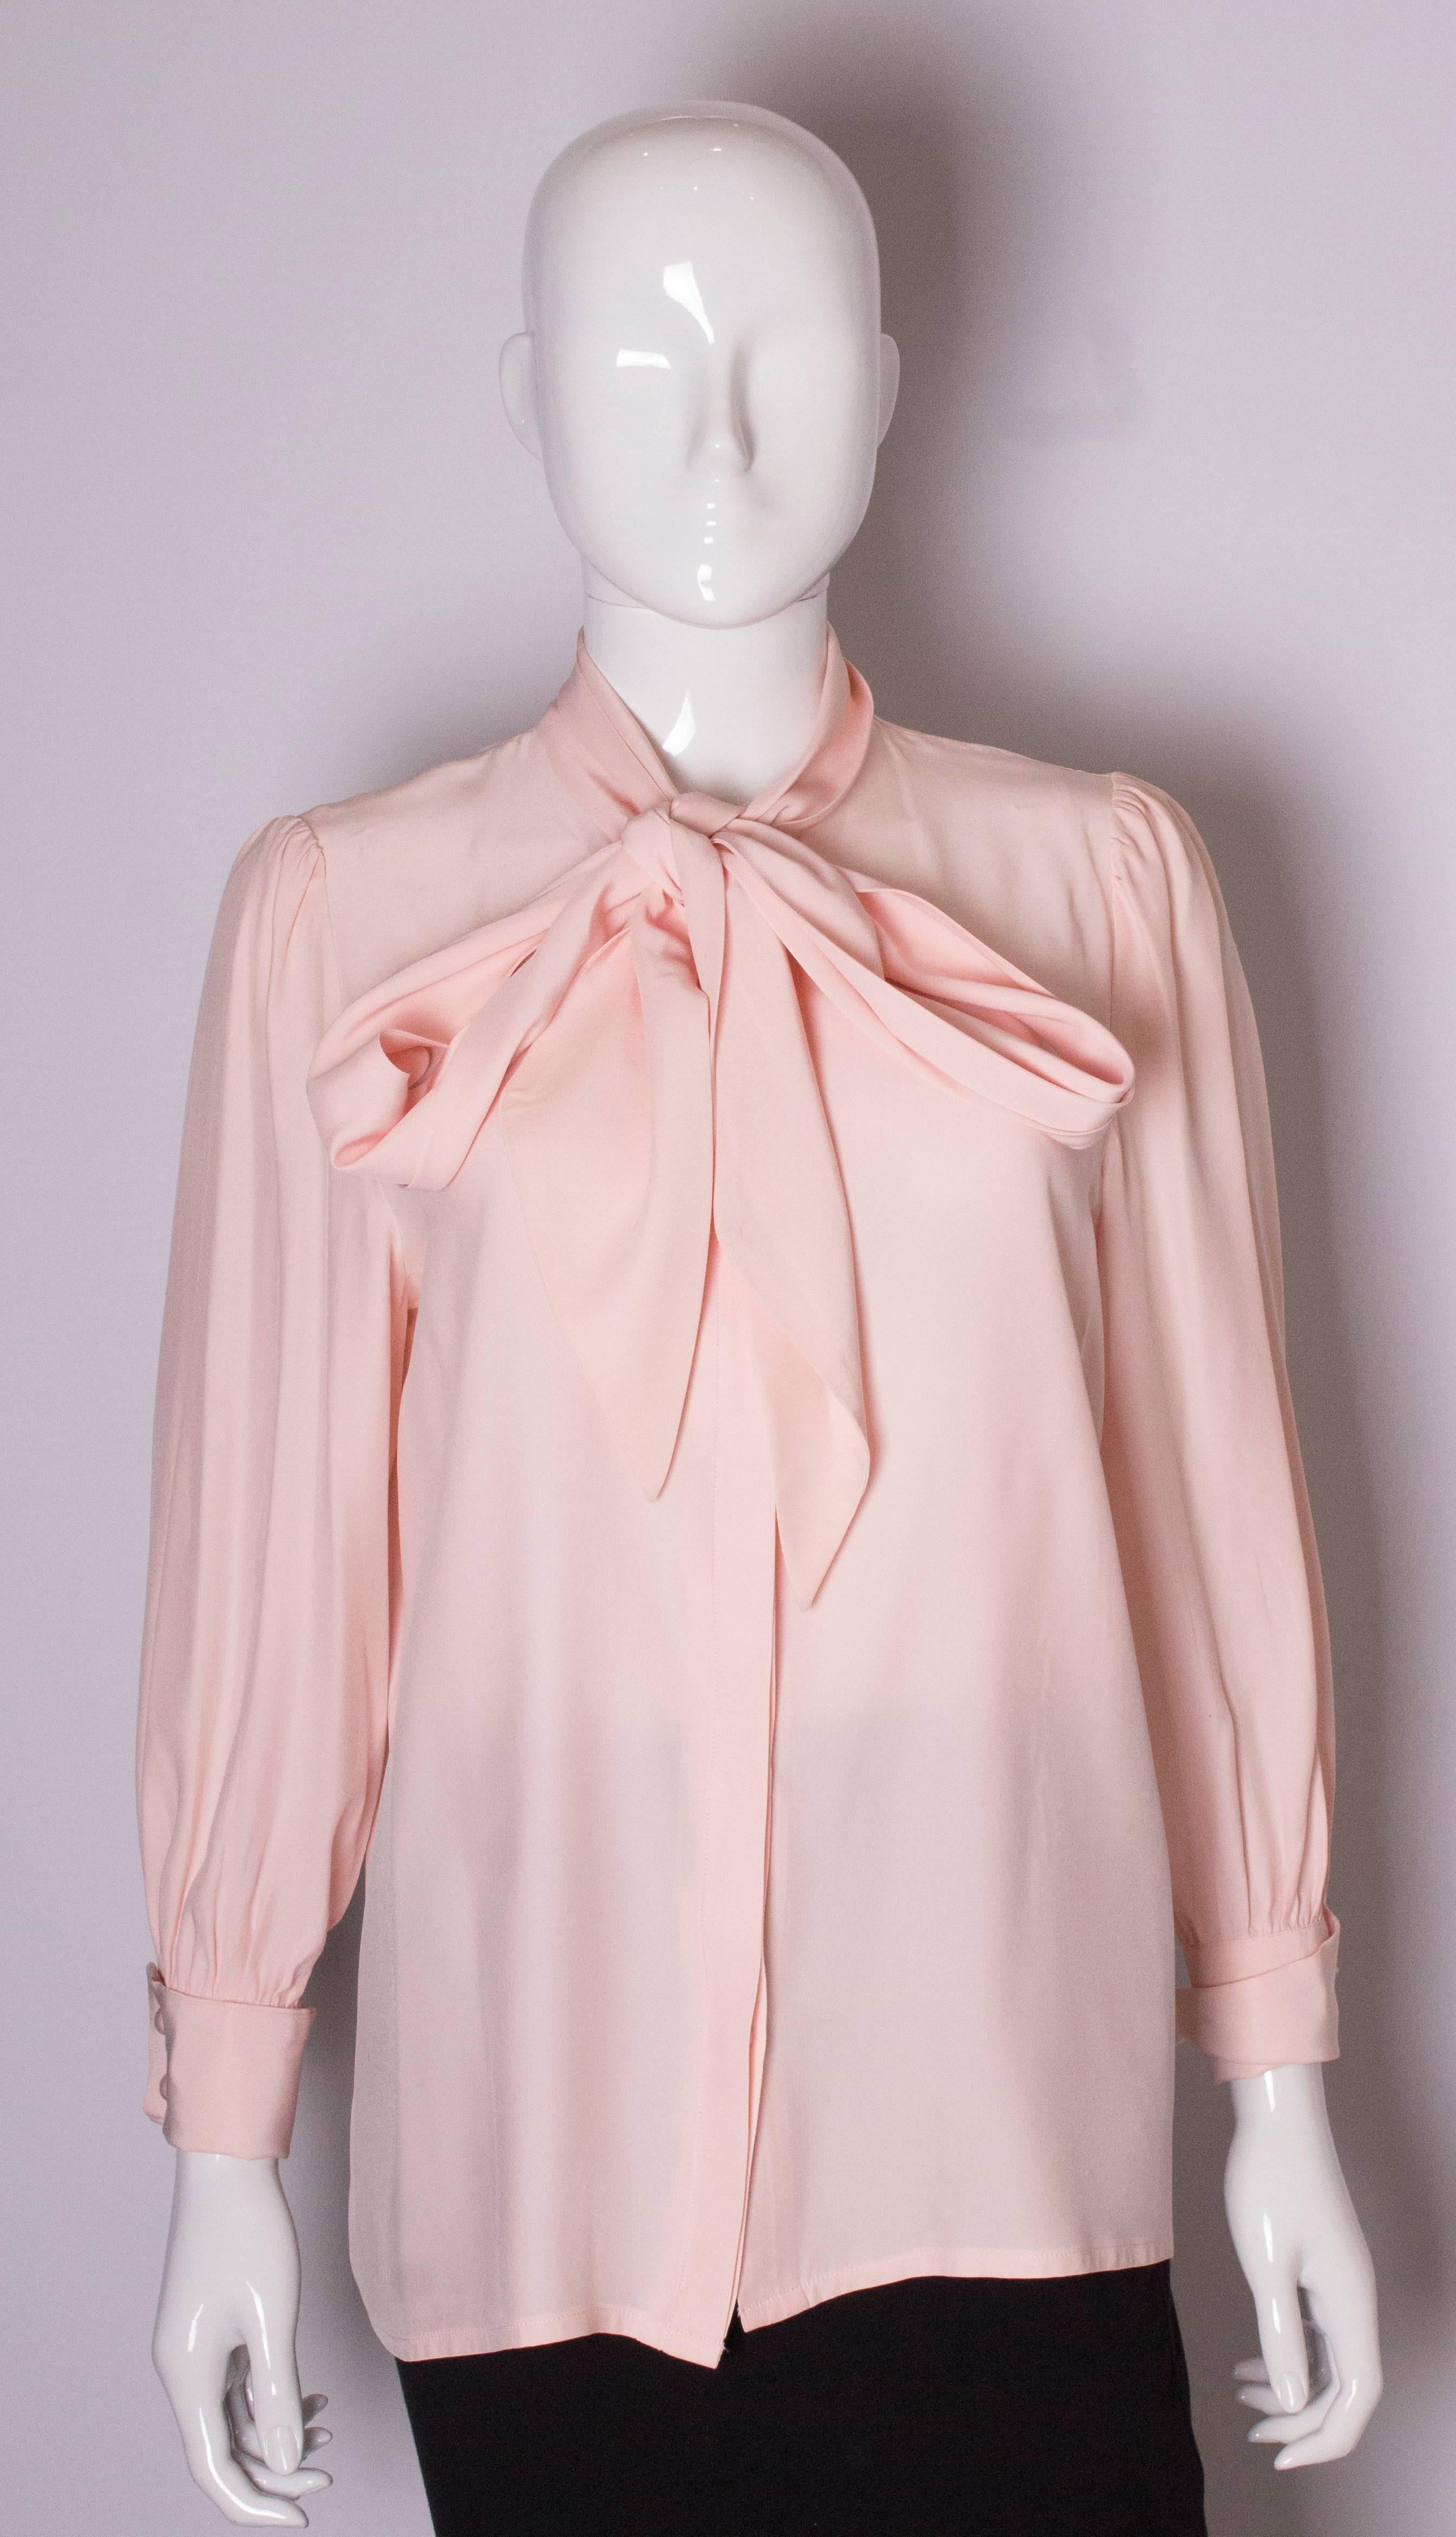 A chic vintage pink silk blouse by Hardy Amies. The blouse has a tie neck and double cuffs.